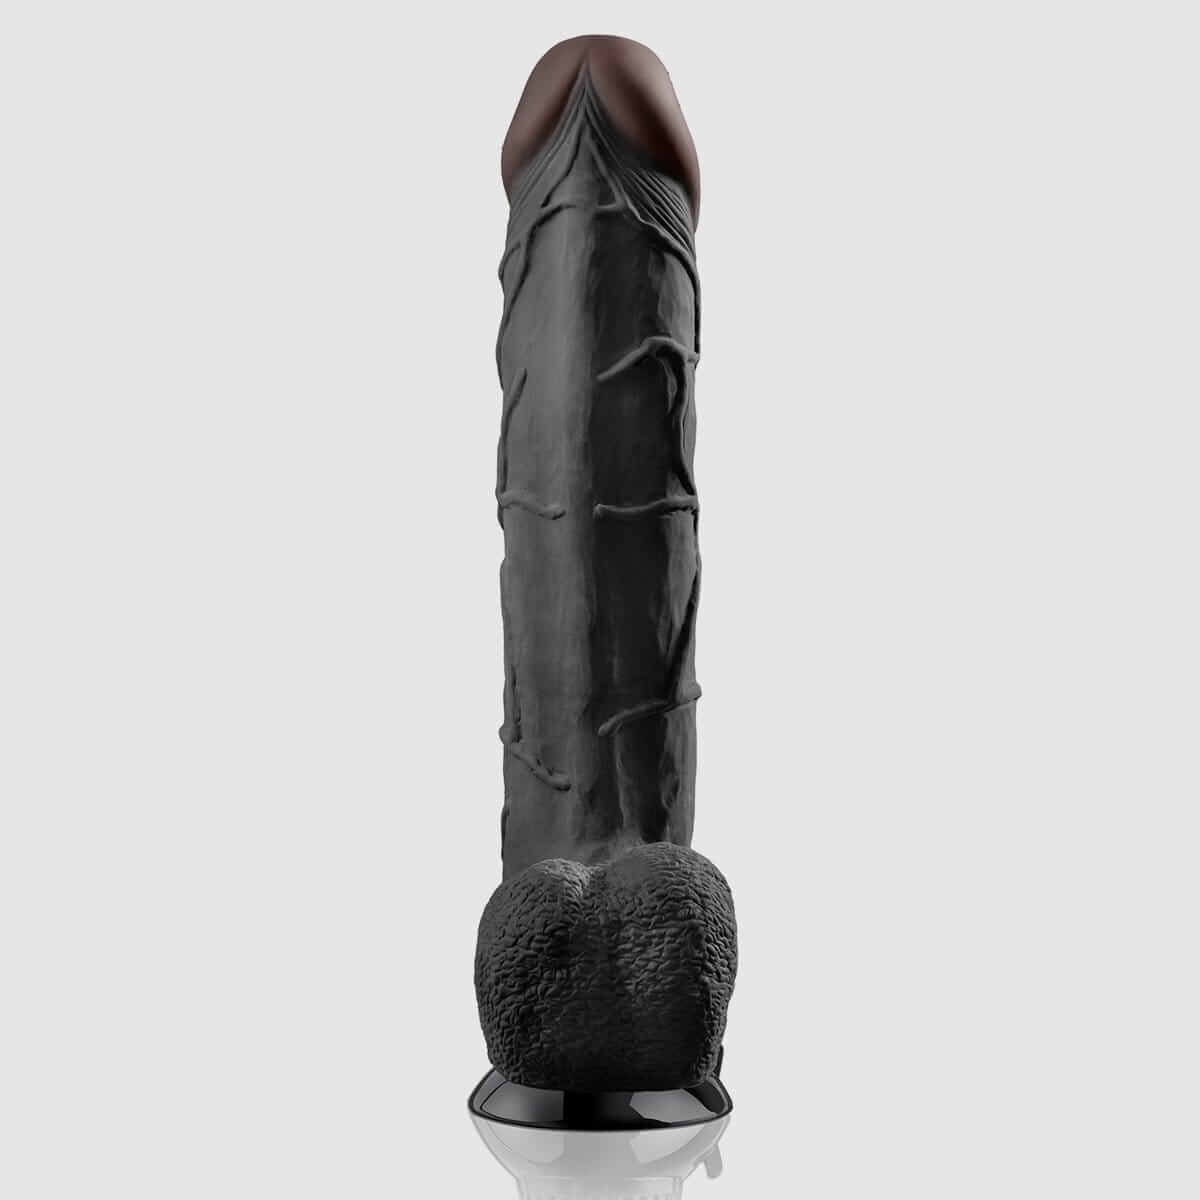 Real Feel Deluxe No.12 - 12" Black Dildo - Thorn & Feather